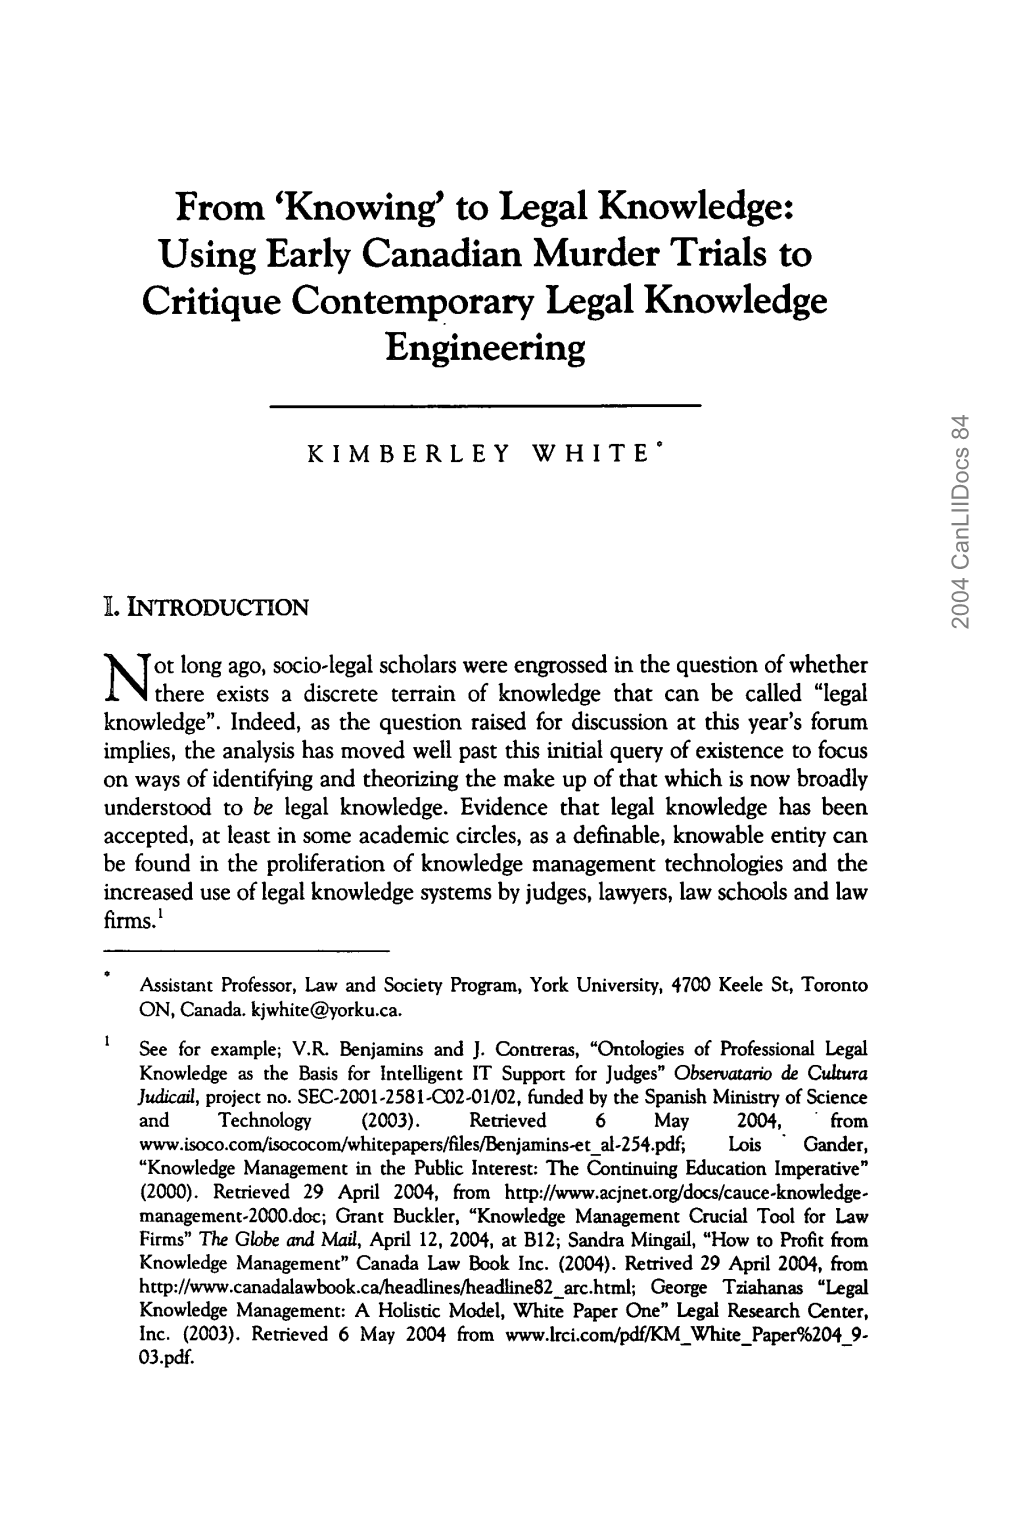 Using Early Canadian Murder Trials to Critique Contemporary Legal Knowledge Engineering